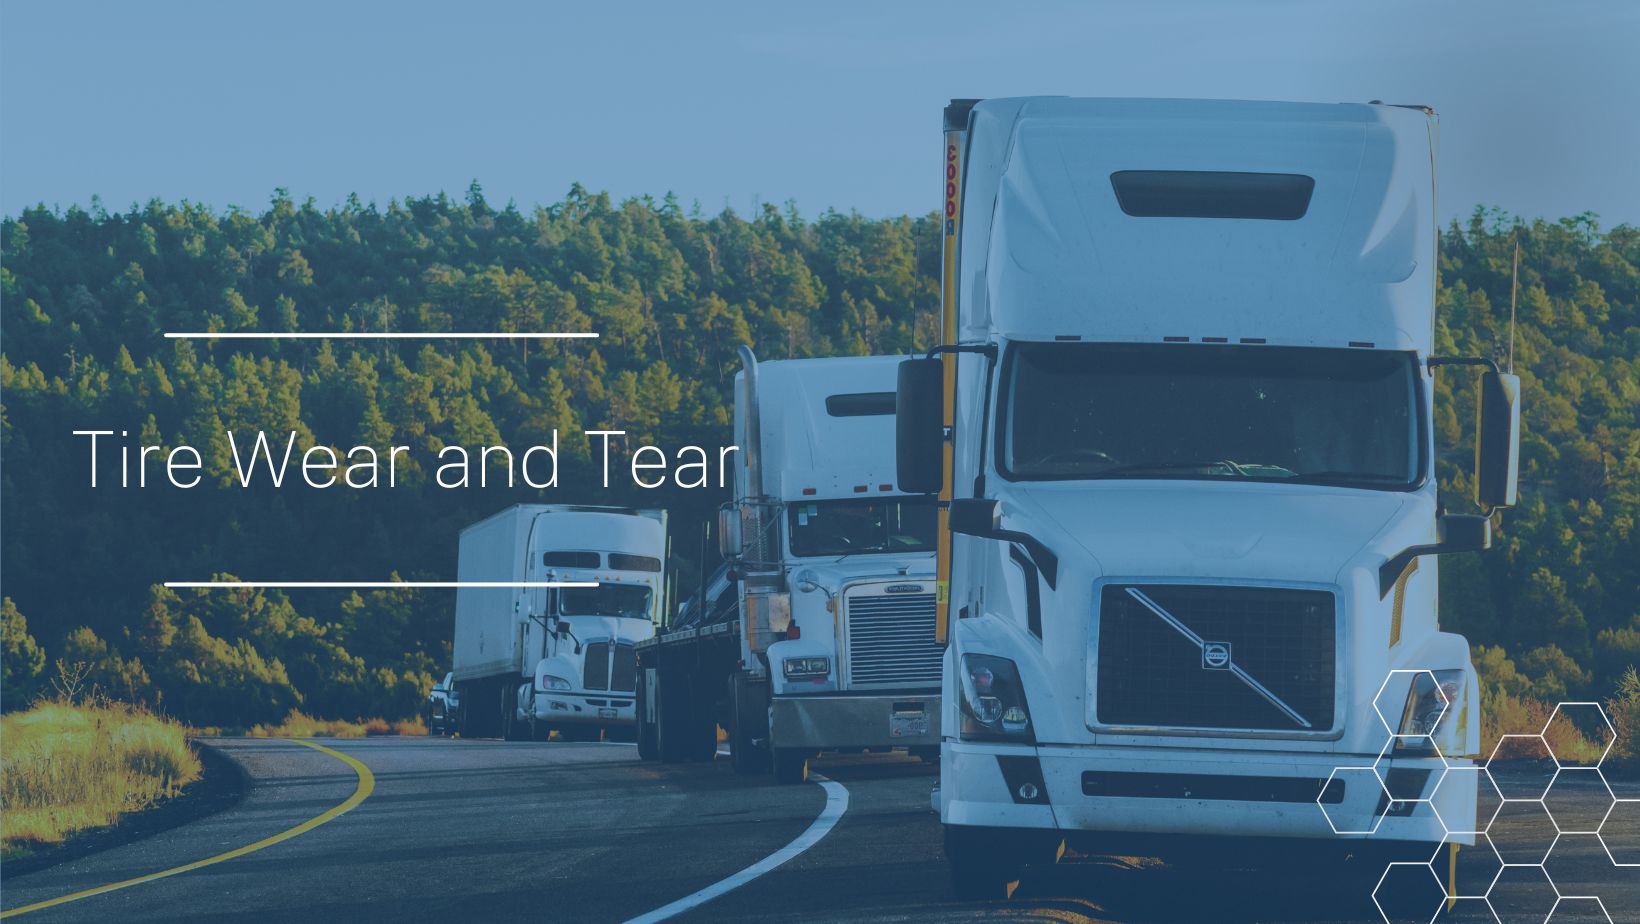 3 Semi-trucks on the road with the text "Tire wear and tear"